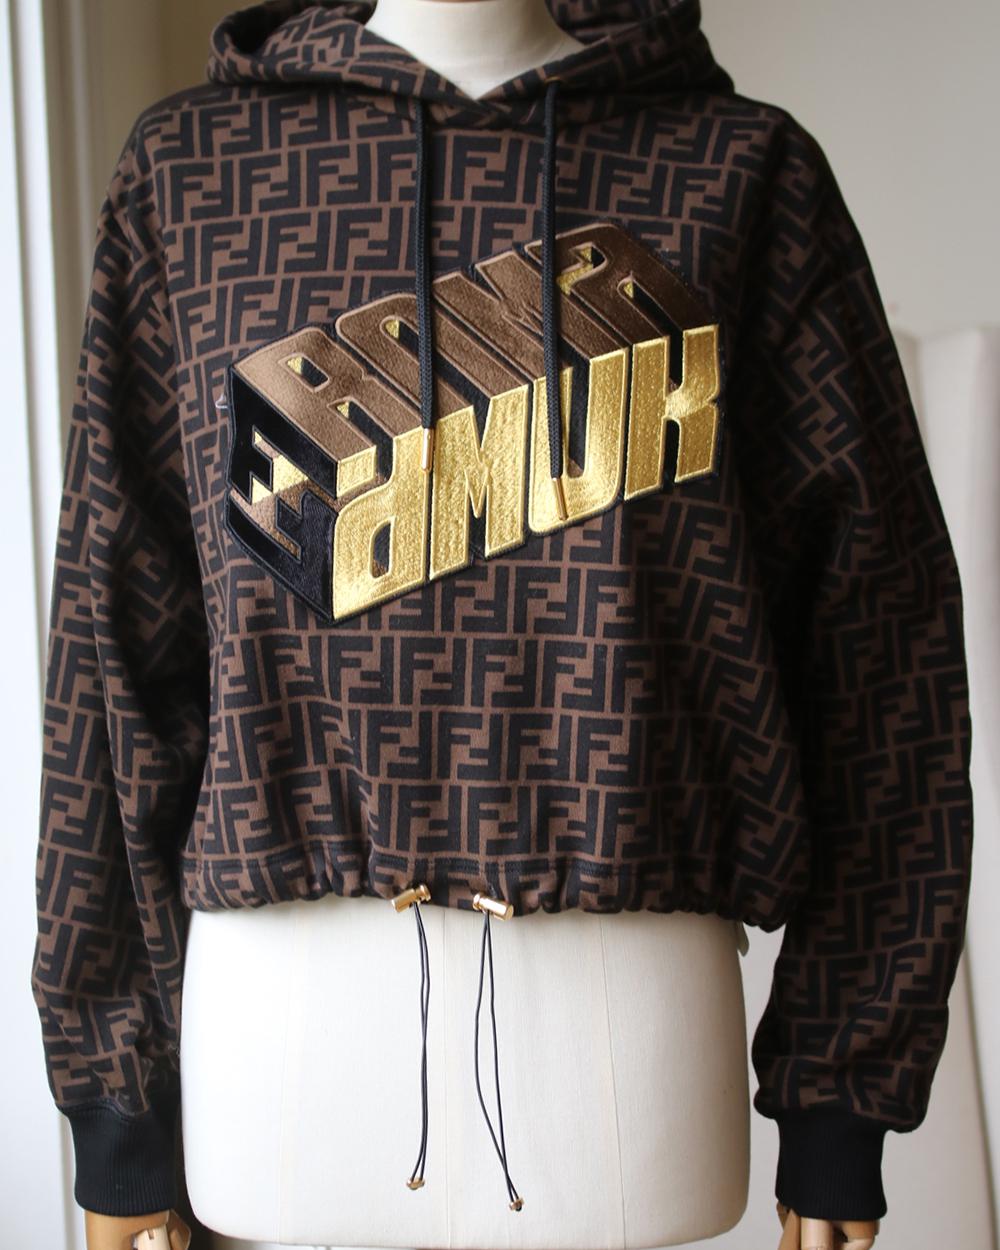 For the new season, Fendi is in utility mode. From exaggerated pockets to the always present logomania motifs, expect to see some serious ready-to-wear magic from the label. Spun Tobacco brown and black cotton. This Fendi Roma Amor sweatshirt